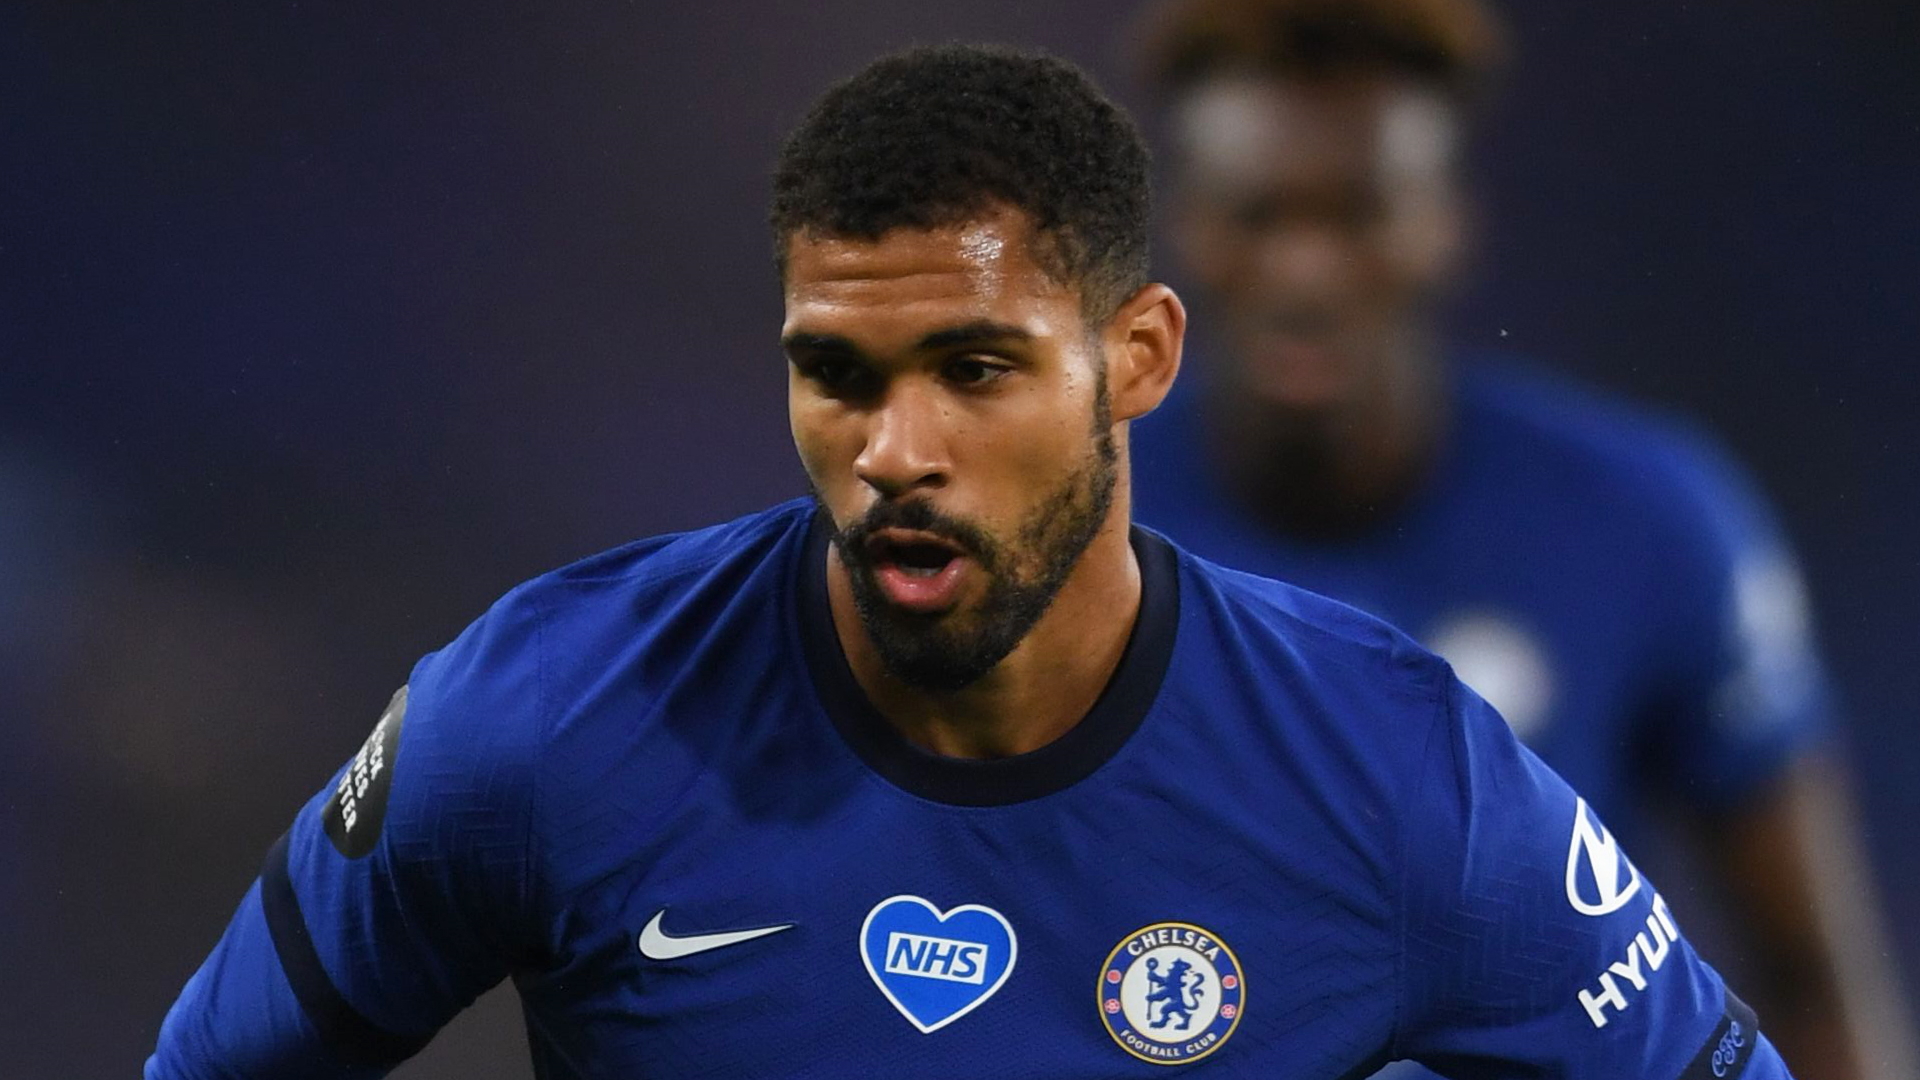 'This is the season I hit the ground running' - Chelsea's Loftus-Cheek feeling 'really fit and strong' after Fulham loan spell